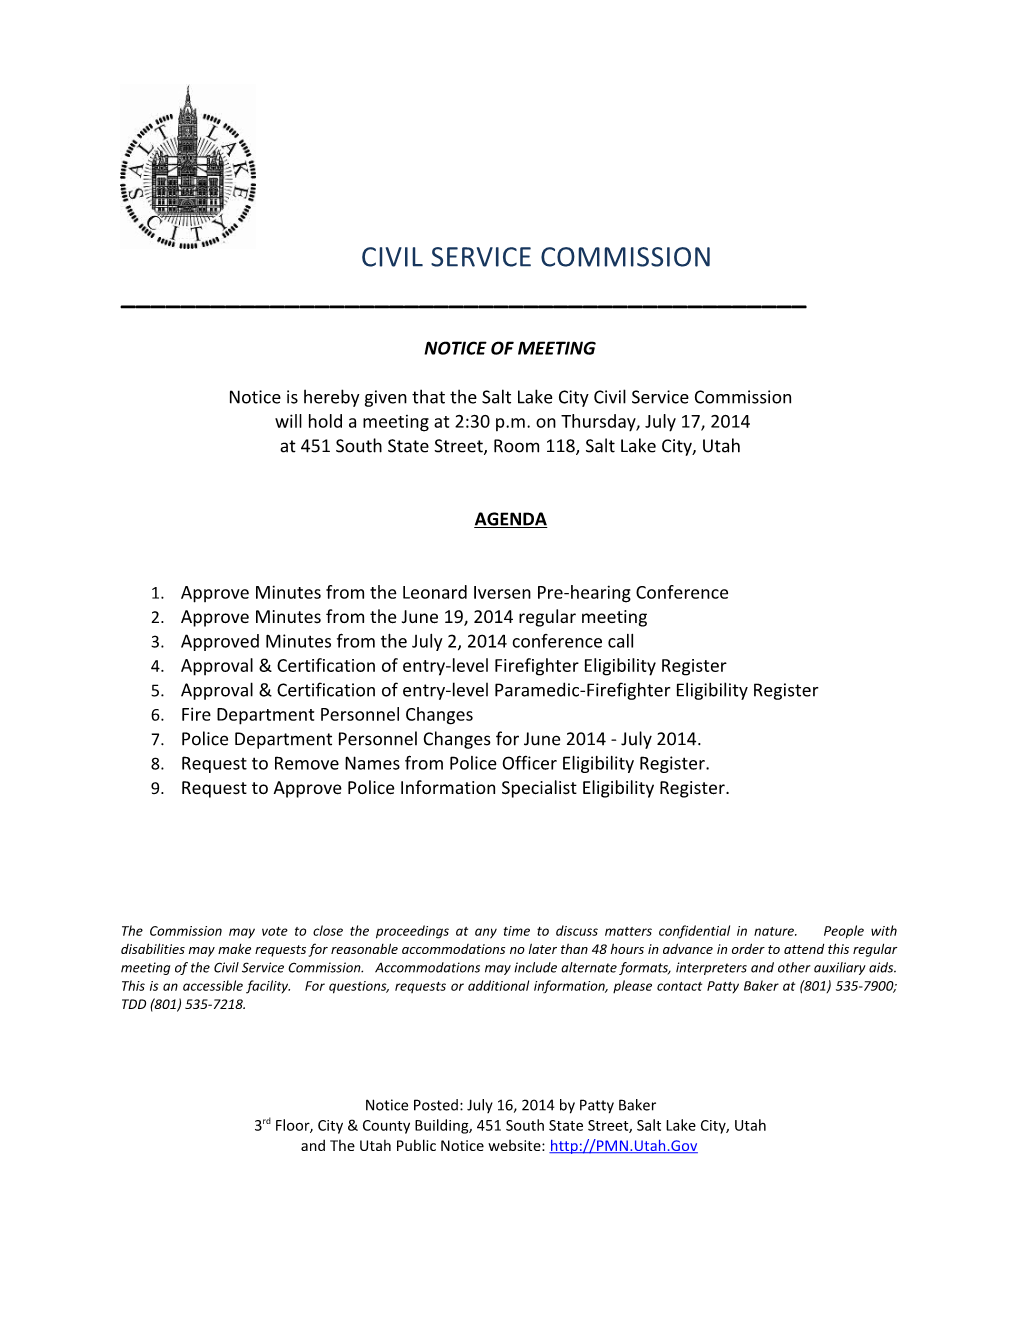 Notice Is Hereby Given That the Salt Lake City Civil Service Commission